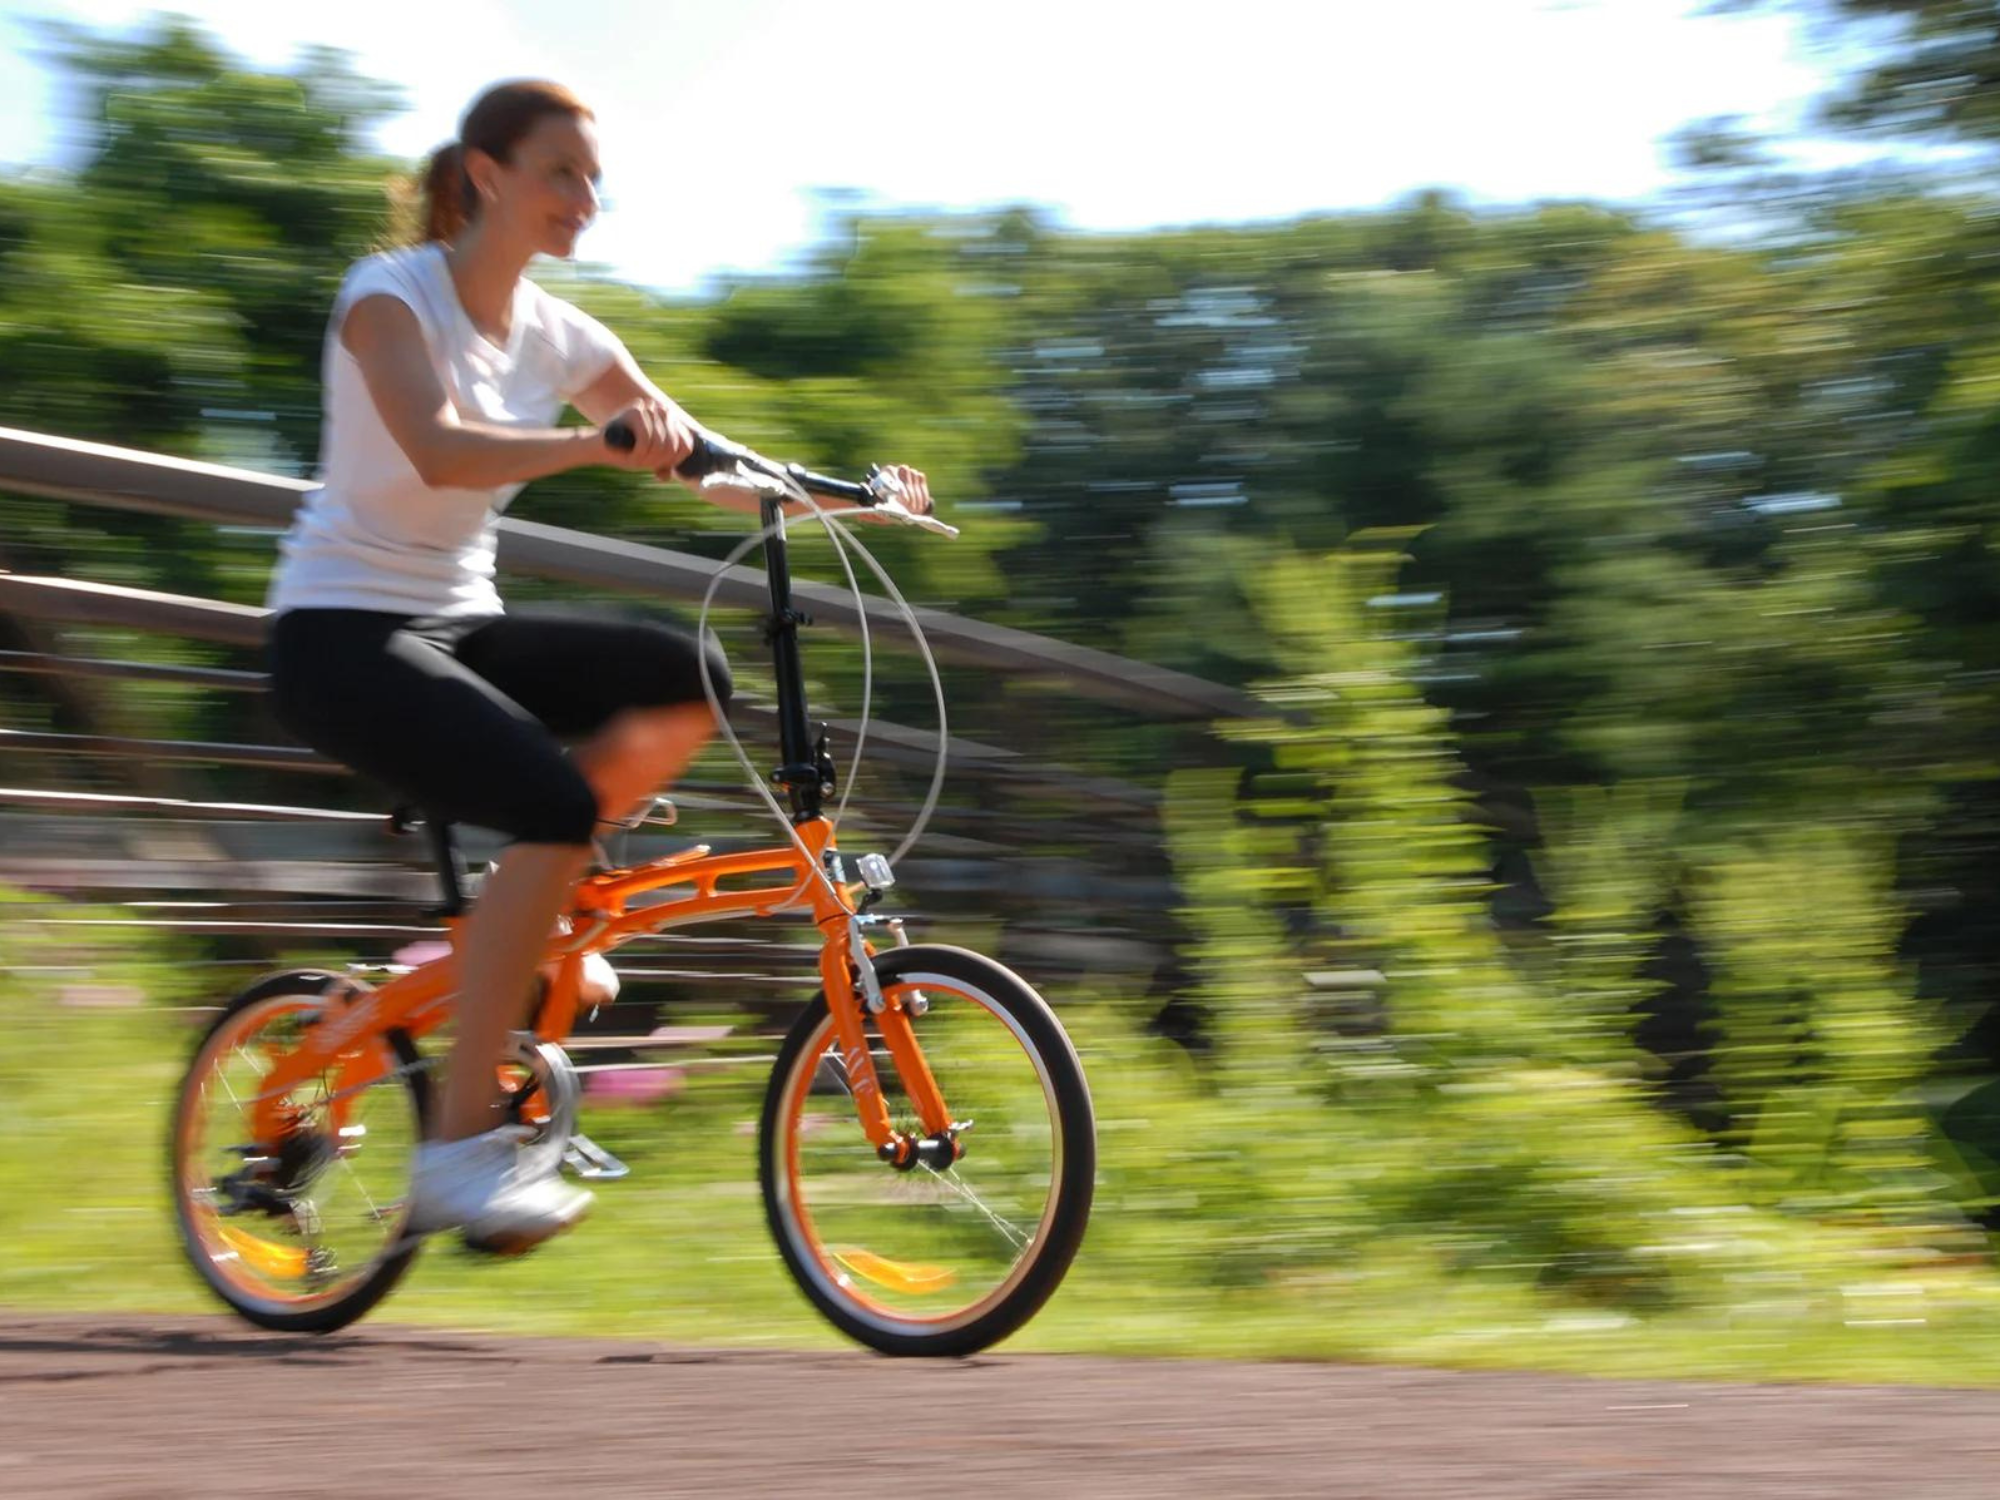 BEST PLACES TO BIKE IN NEW JERSEY